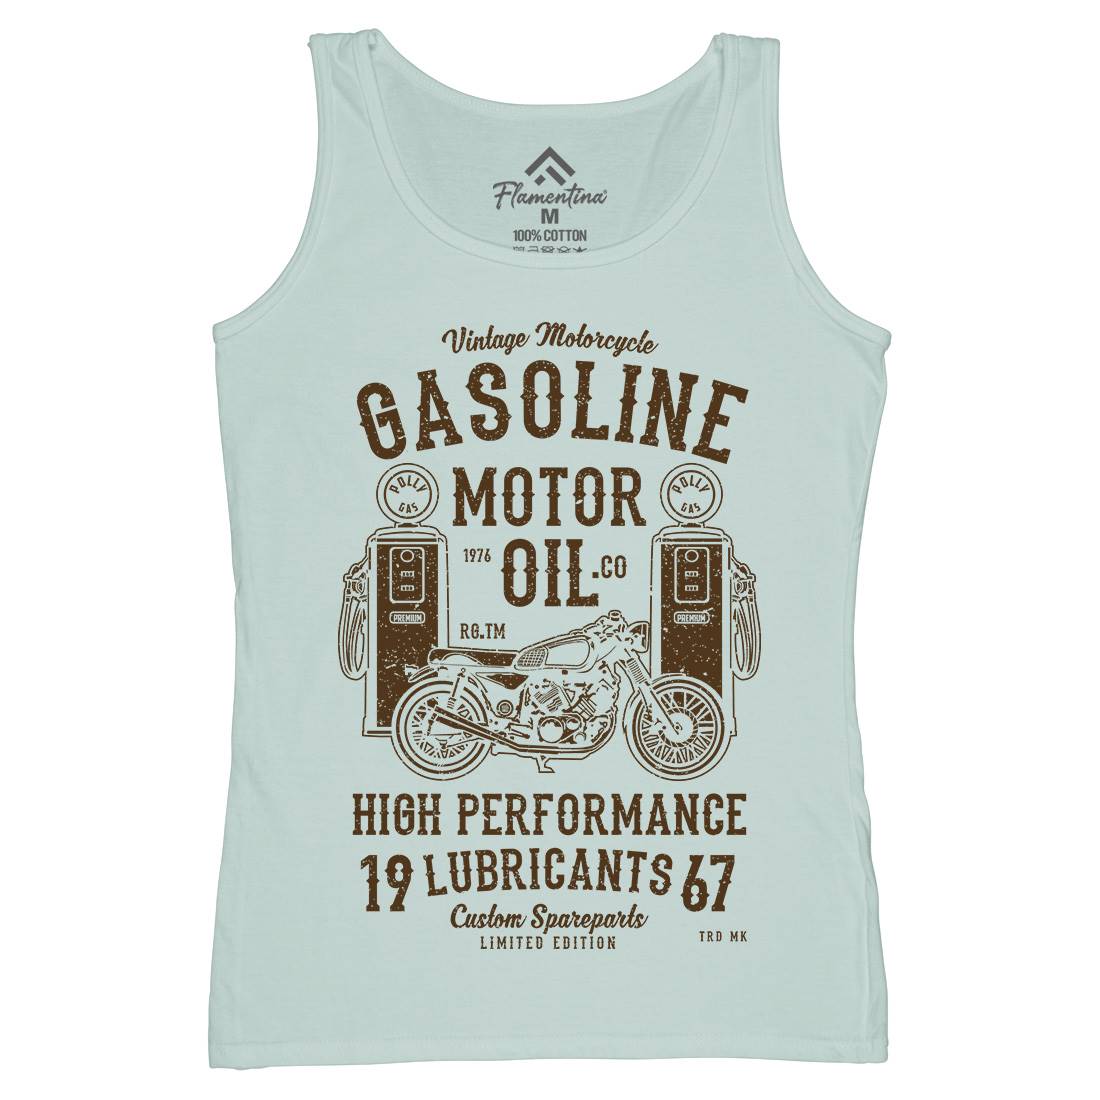 Gasoline Motor Oil Womens Organic Tank Top Vest Motorcycles A669